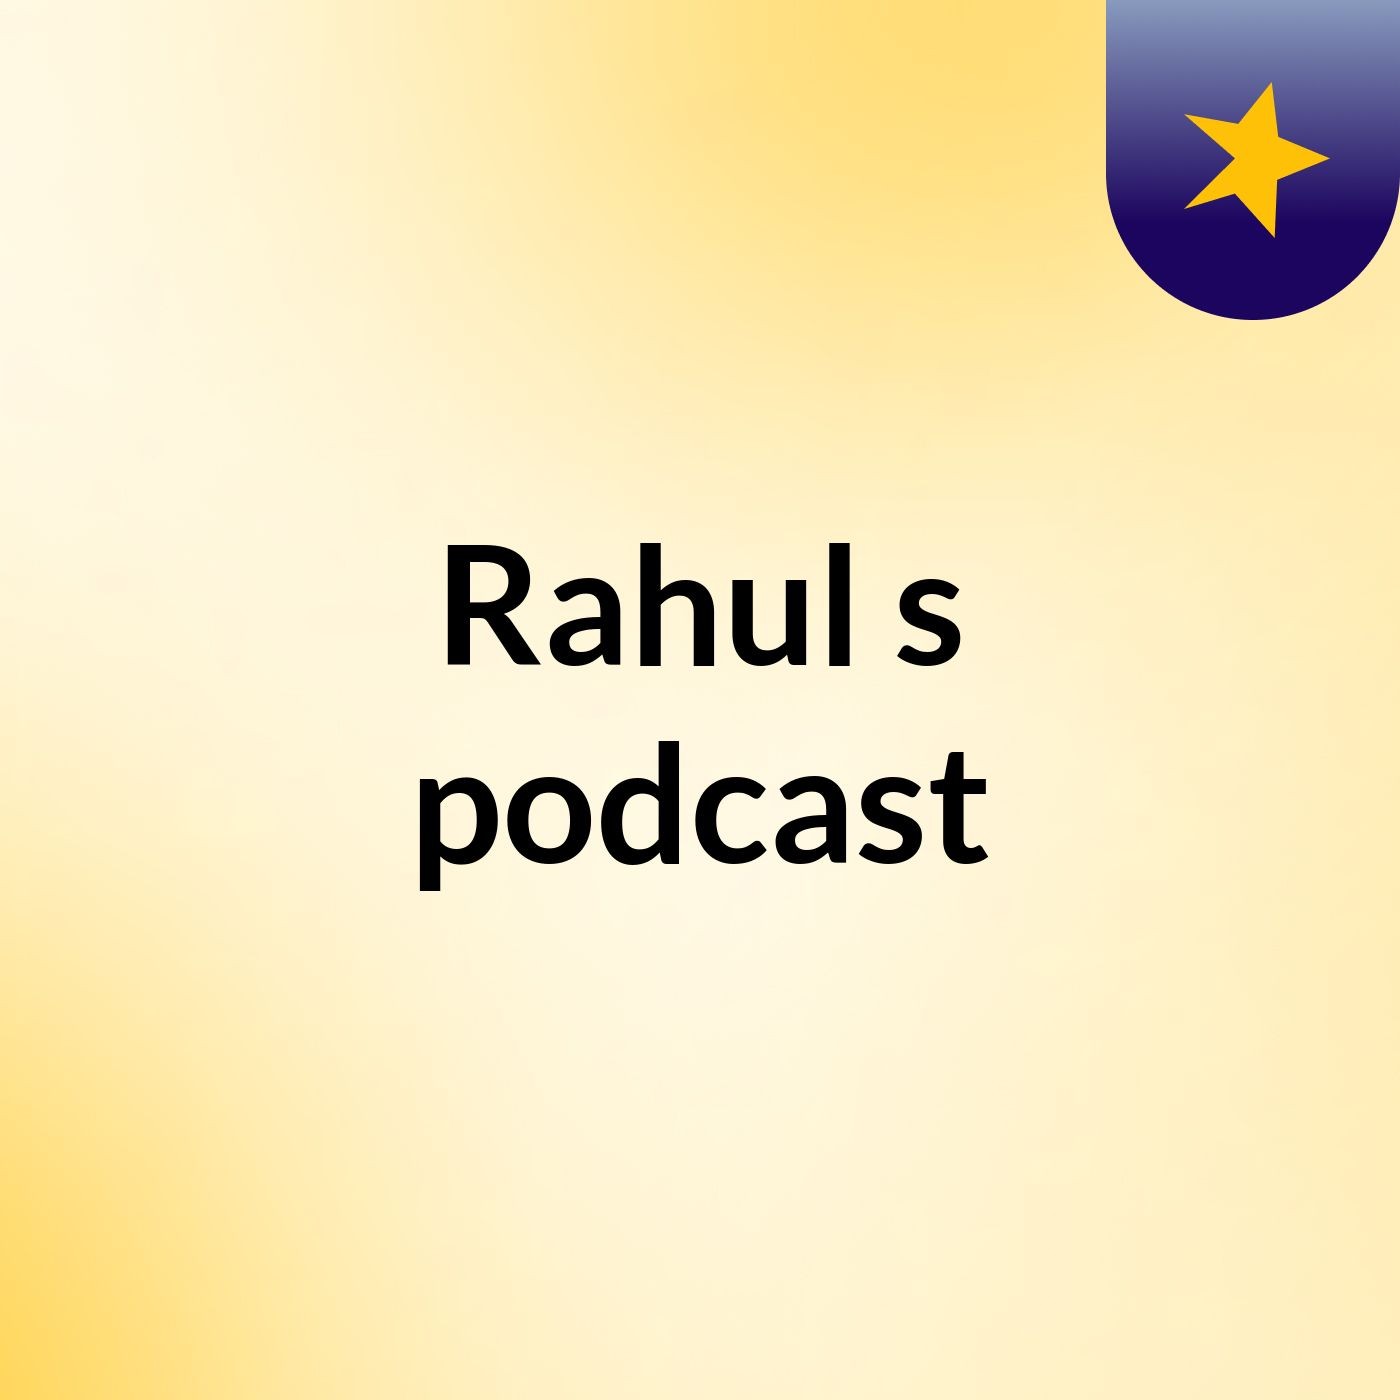 ExEpisode 4 - Rahul's podcast